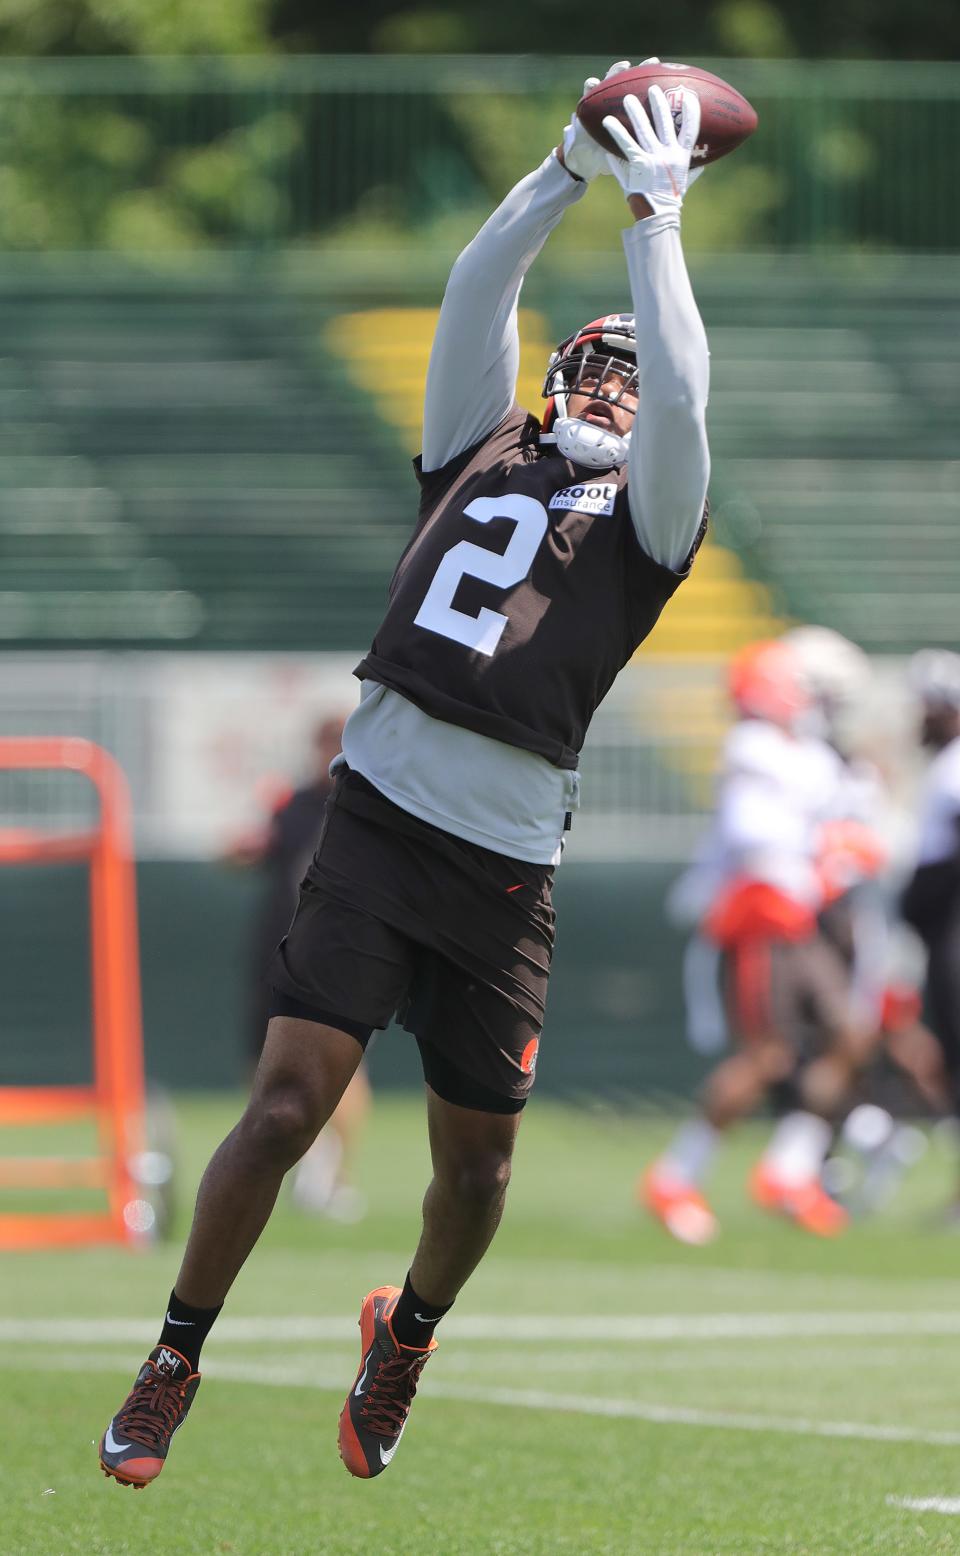 Cleveland Browns receiver Amari Cooper goes up to make a catch during training camp on Thursday, July 28, 2022 in Berea.